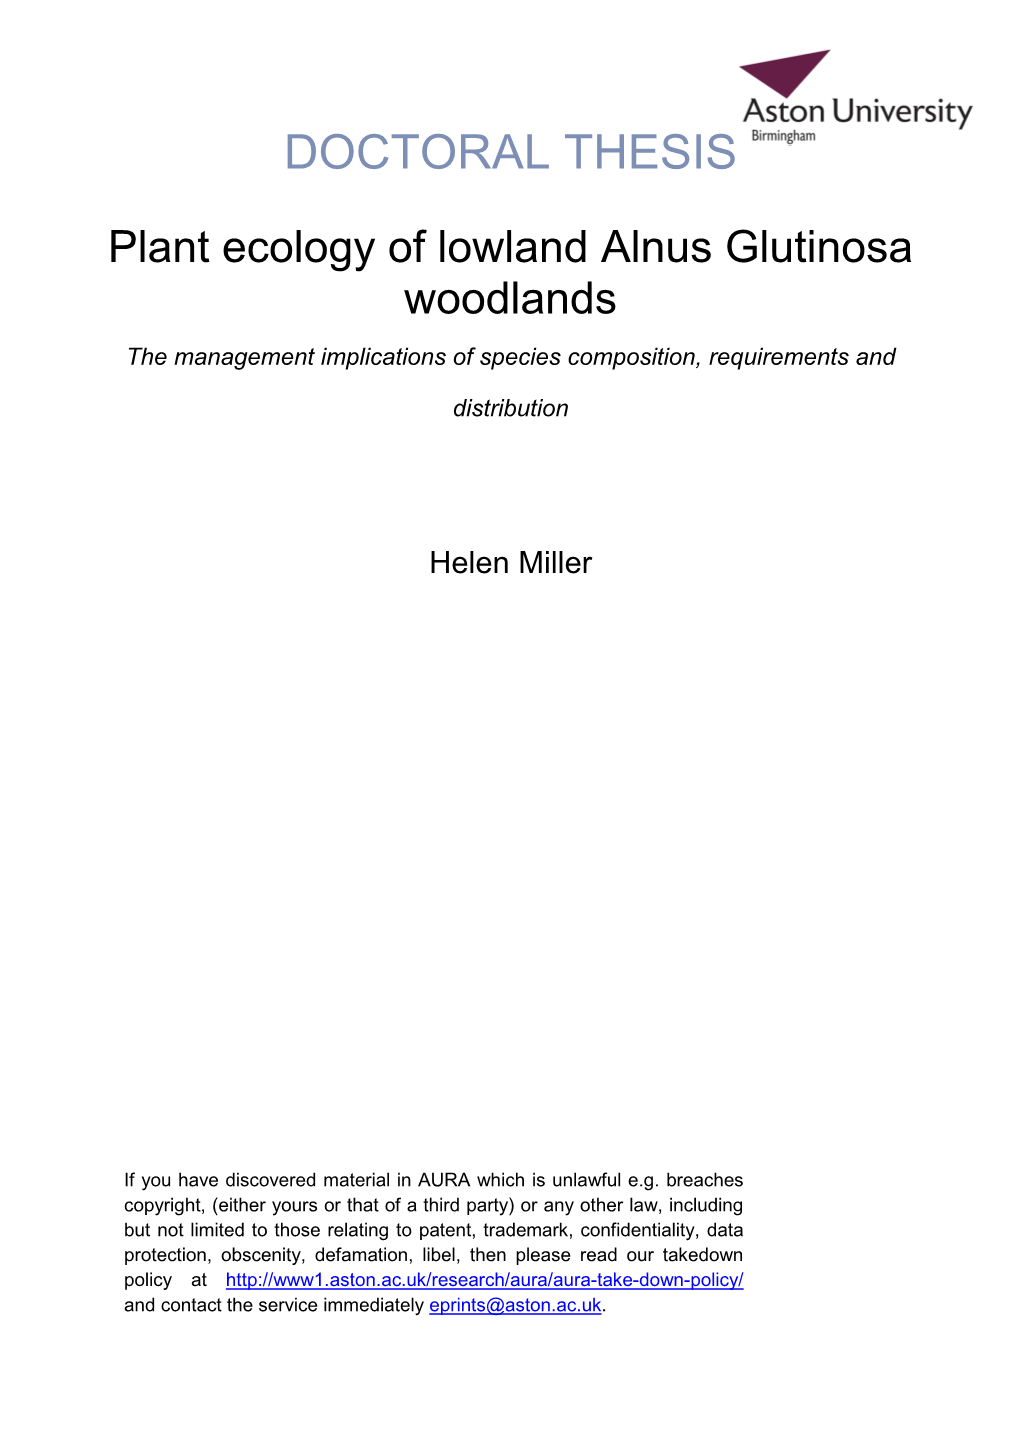 Plant Ecology of Lowland Alnus Glutinosa Woodlands: the Management Implications of Species Composition, Requirements and Distribution